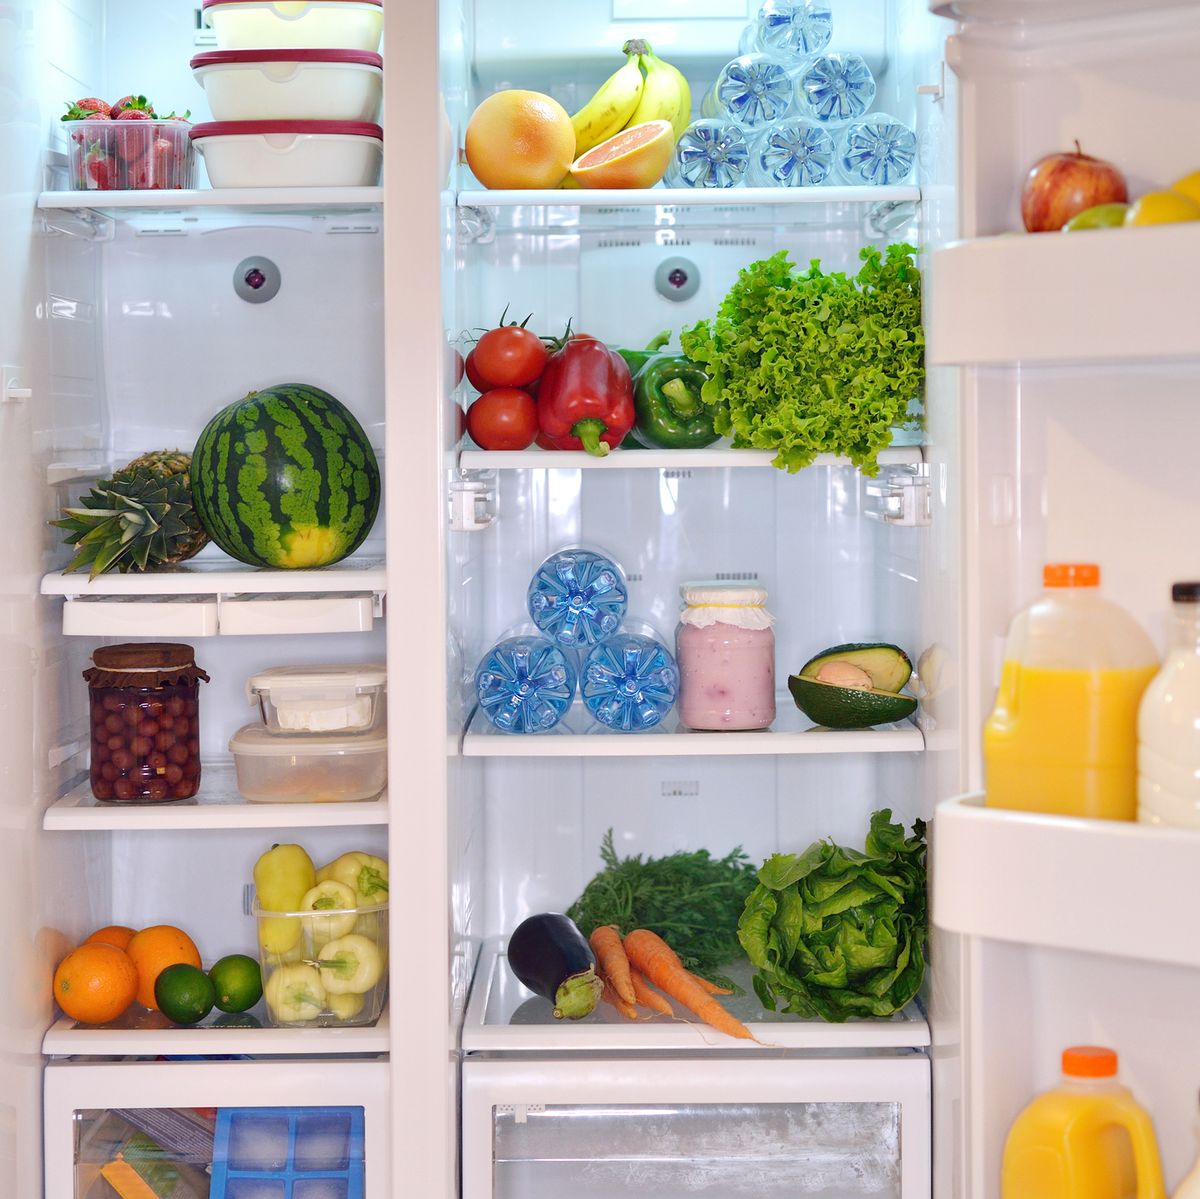 How to Organize Your Refrigerator for Healthy Eating